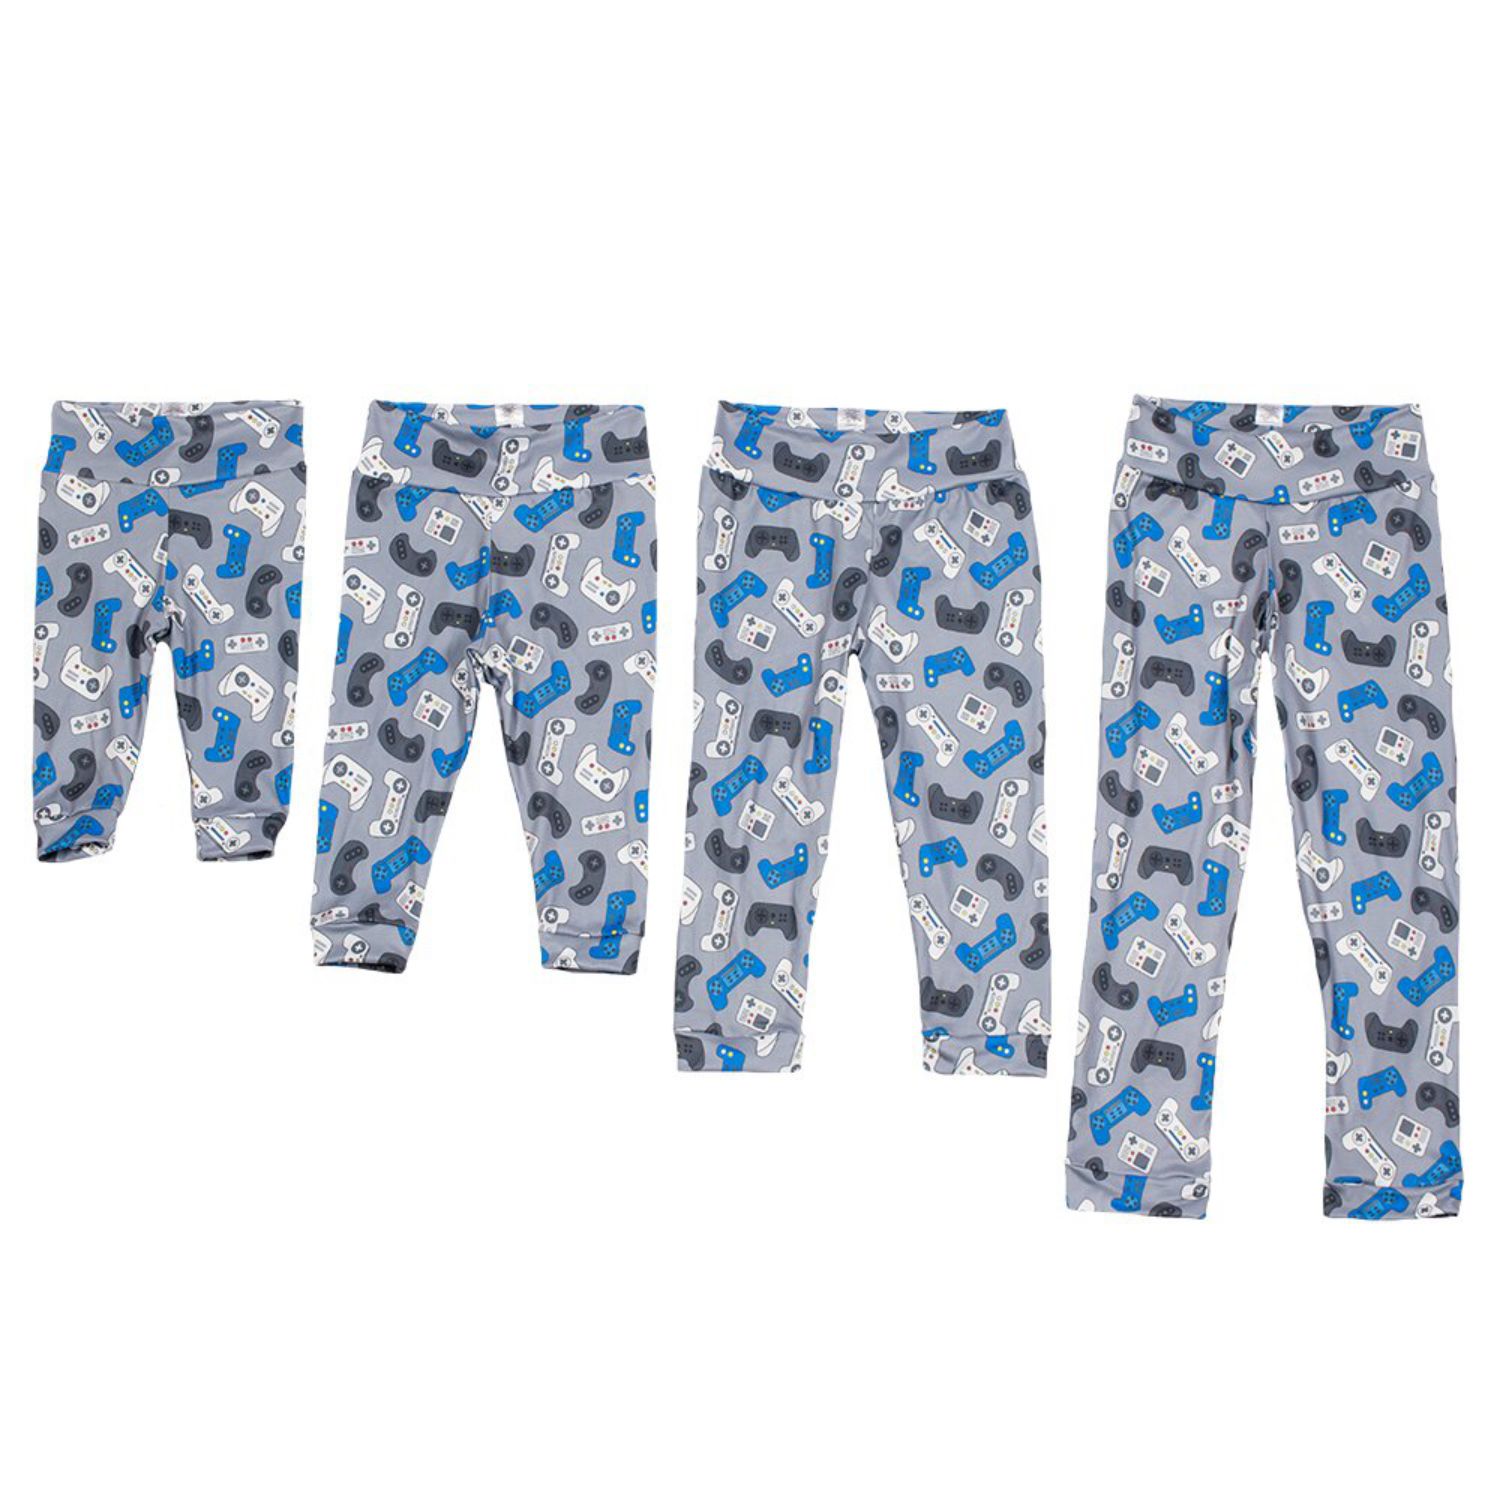 Bumblito Leggings (Size: S / Pattern: Play On) Pattern: Play On / Size: S (50 - 68)